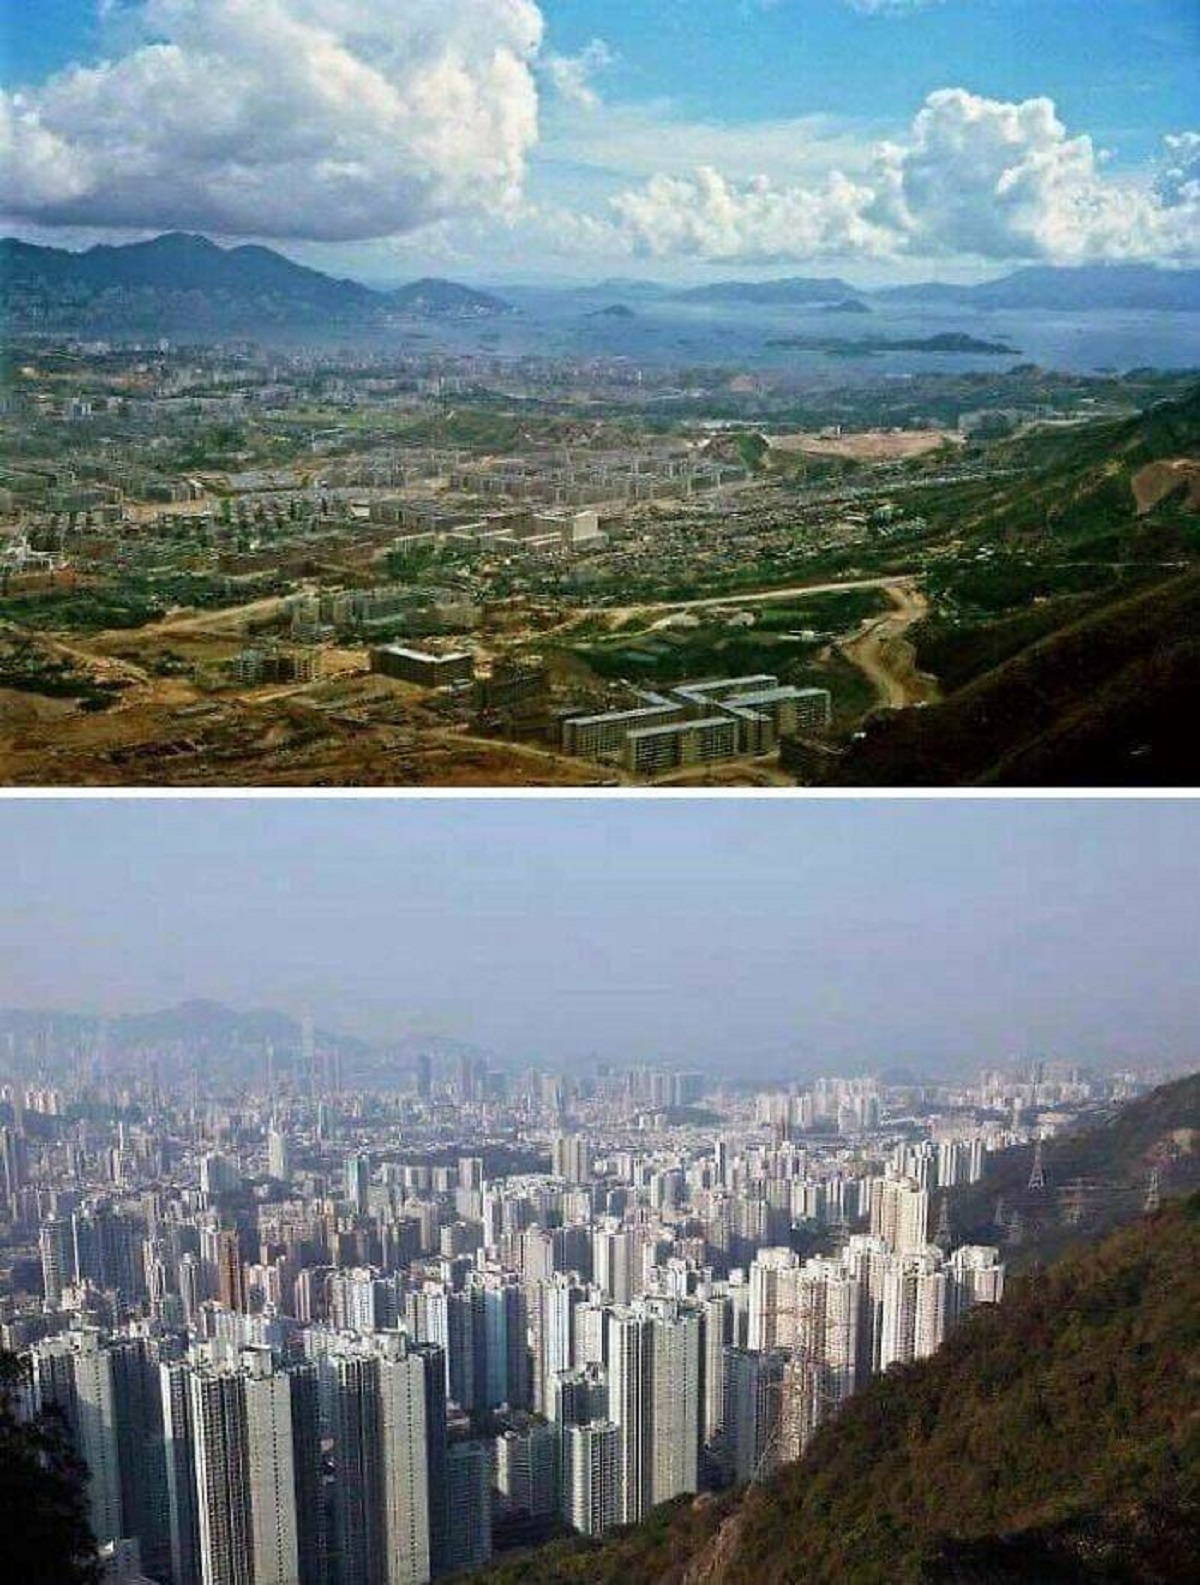 "Hong Kong In 1964 And Now"